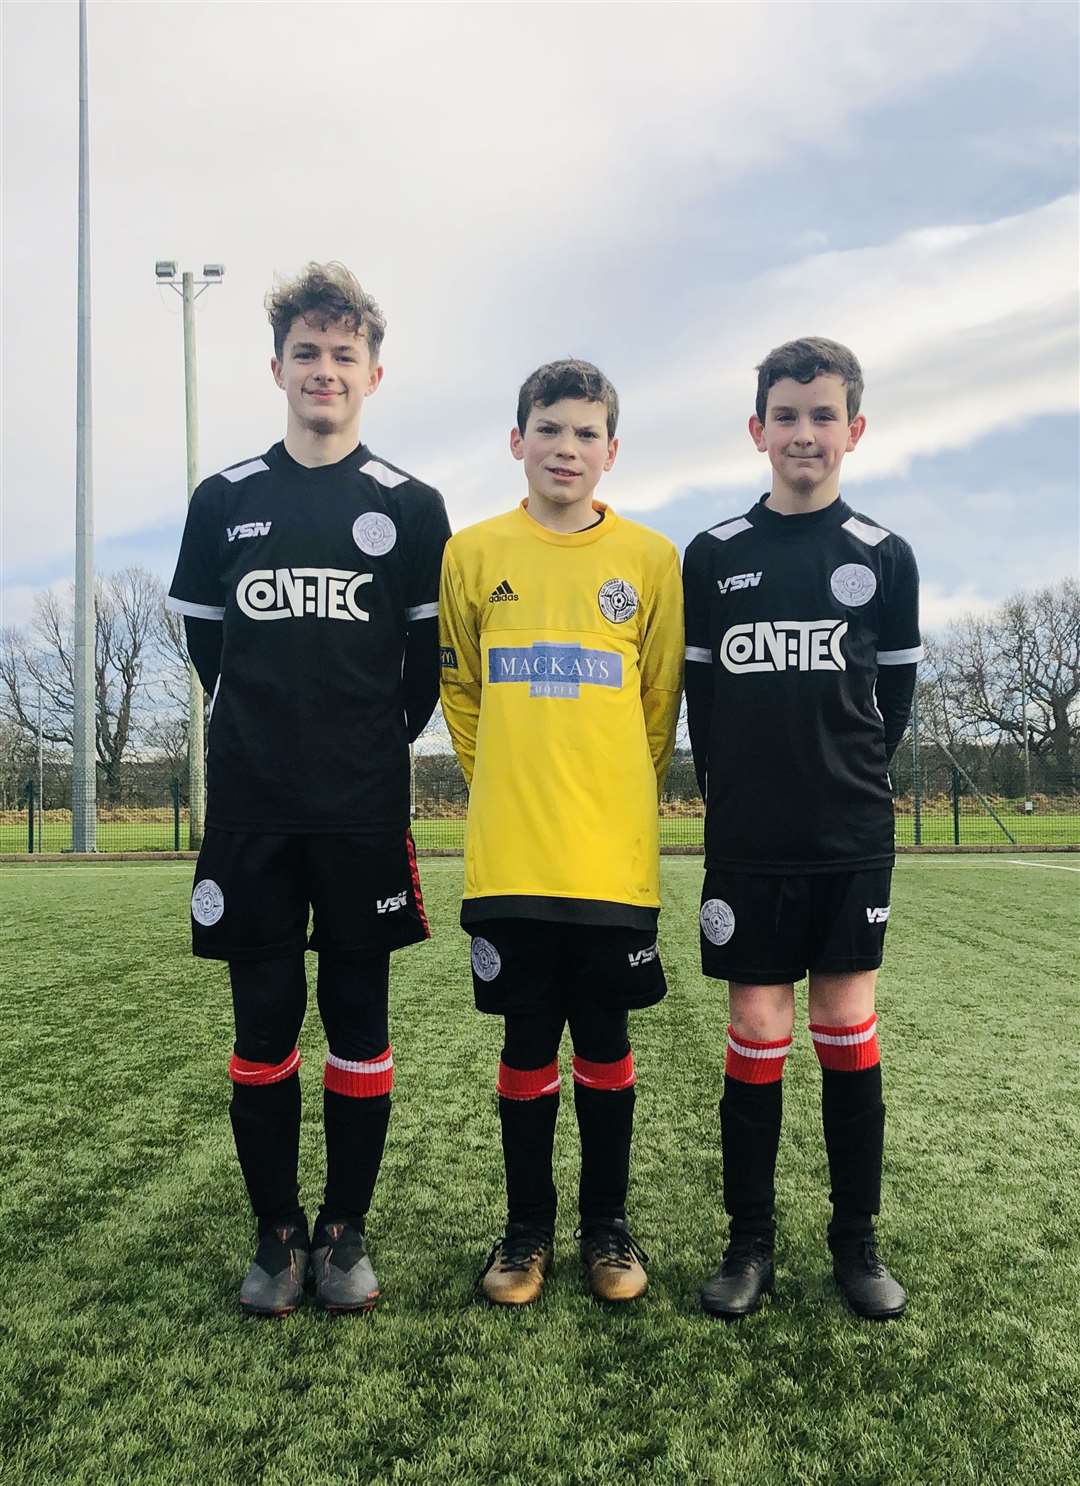 Top performers for Caithness U13s were (from left) Euan Kennedy, Tom Armitage and Sam Shearer.